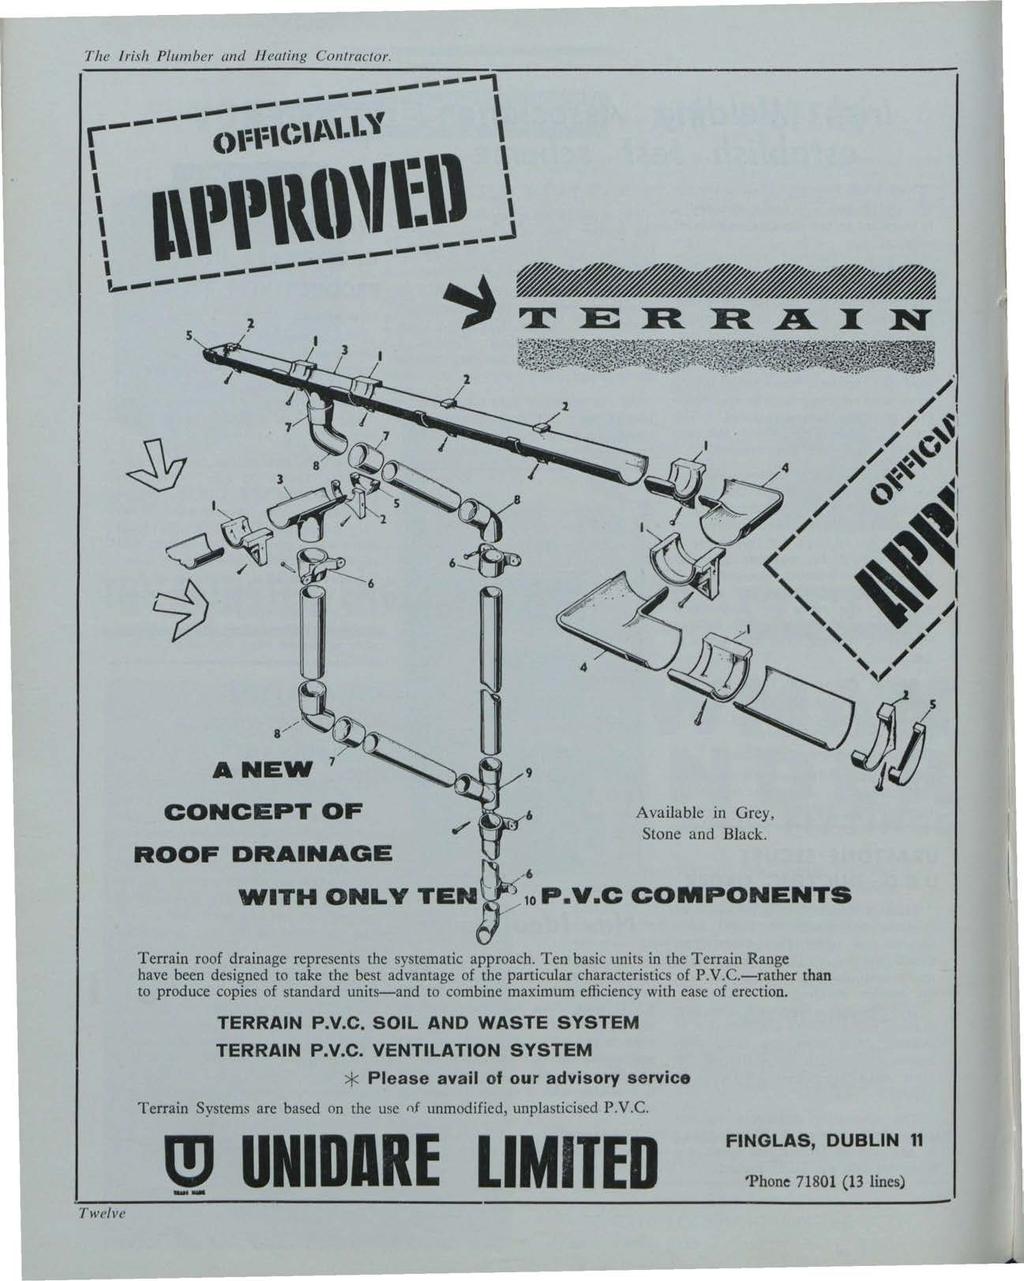 The Irish Plumber and Jleating Contractor. Building Services News, Vol. 2, Iss. 12 [1963], Art. 1 ANEW 7 CONCEPT OF 6 Available in Grey, ~ Stone and Black. ROOF DRAINAGE WITH ONLY TEN~-;,P.V.C COMPONENTS Terrain roof drainage represents the systematic approach.